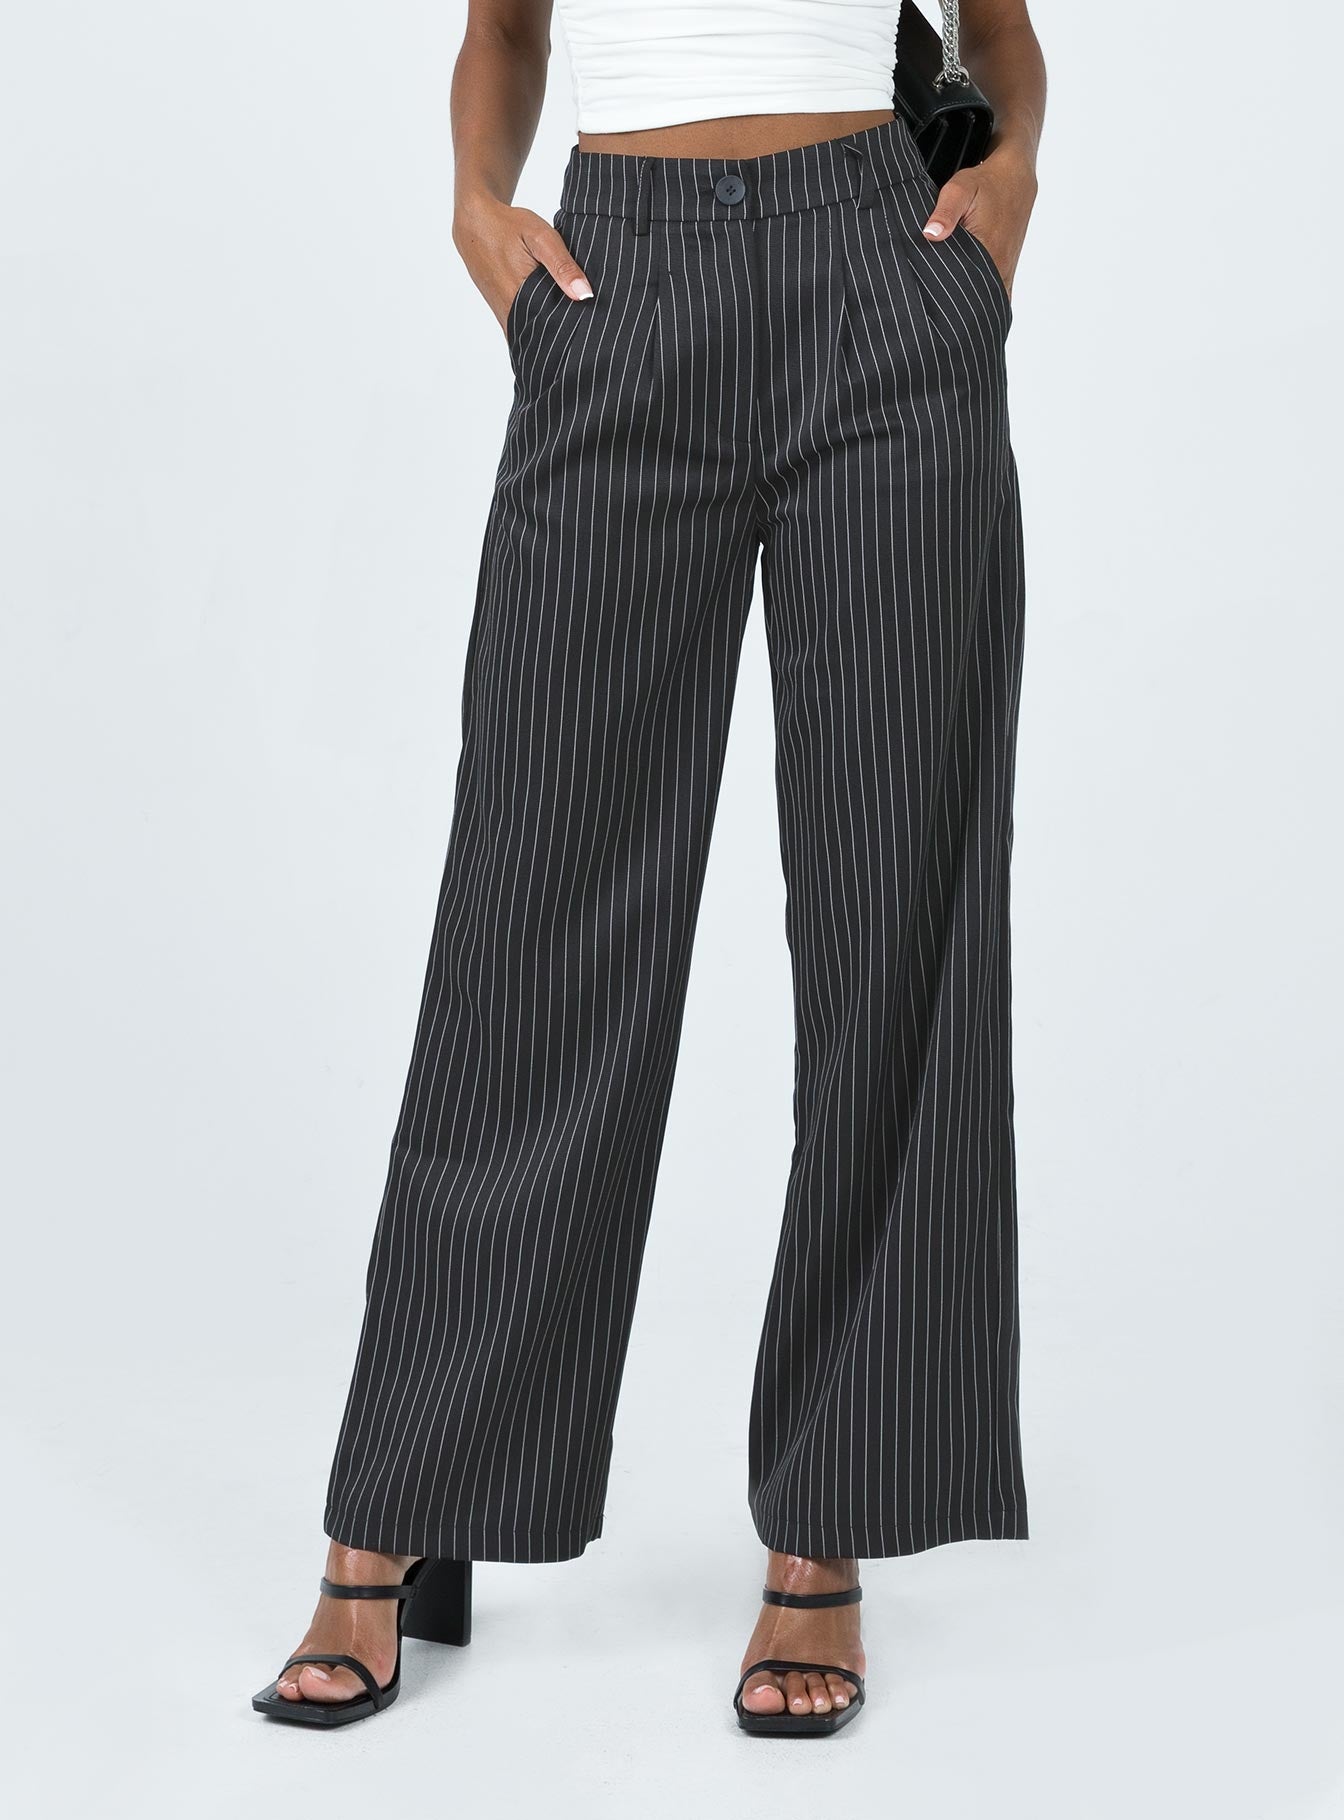 Urban Outfitters Archive Black Skylar Pinstripe Trousers  Urban Outfitters  UK